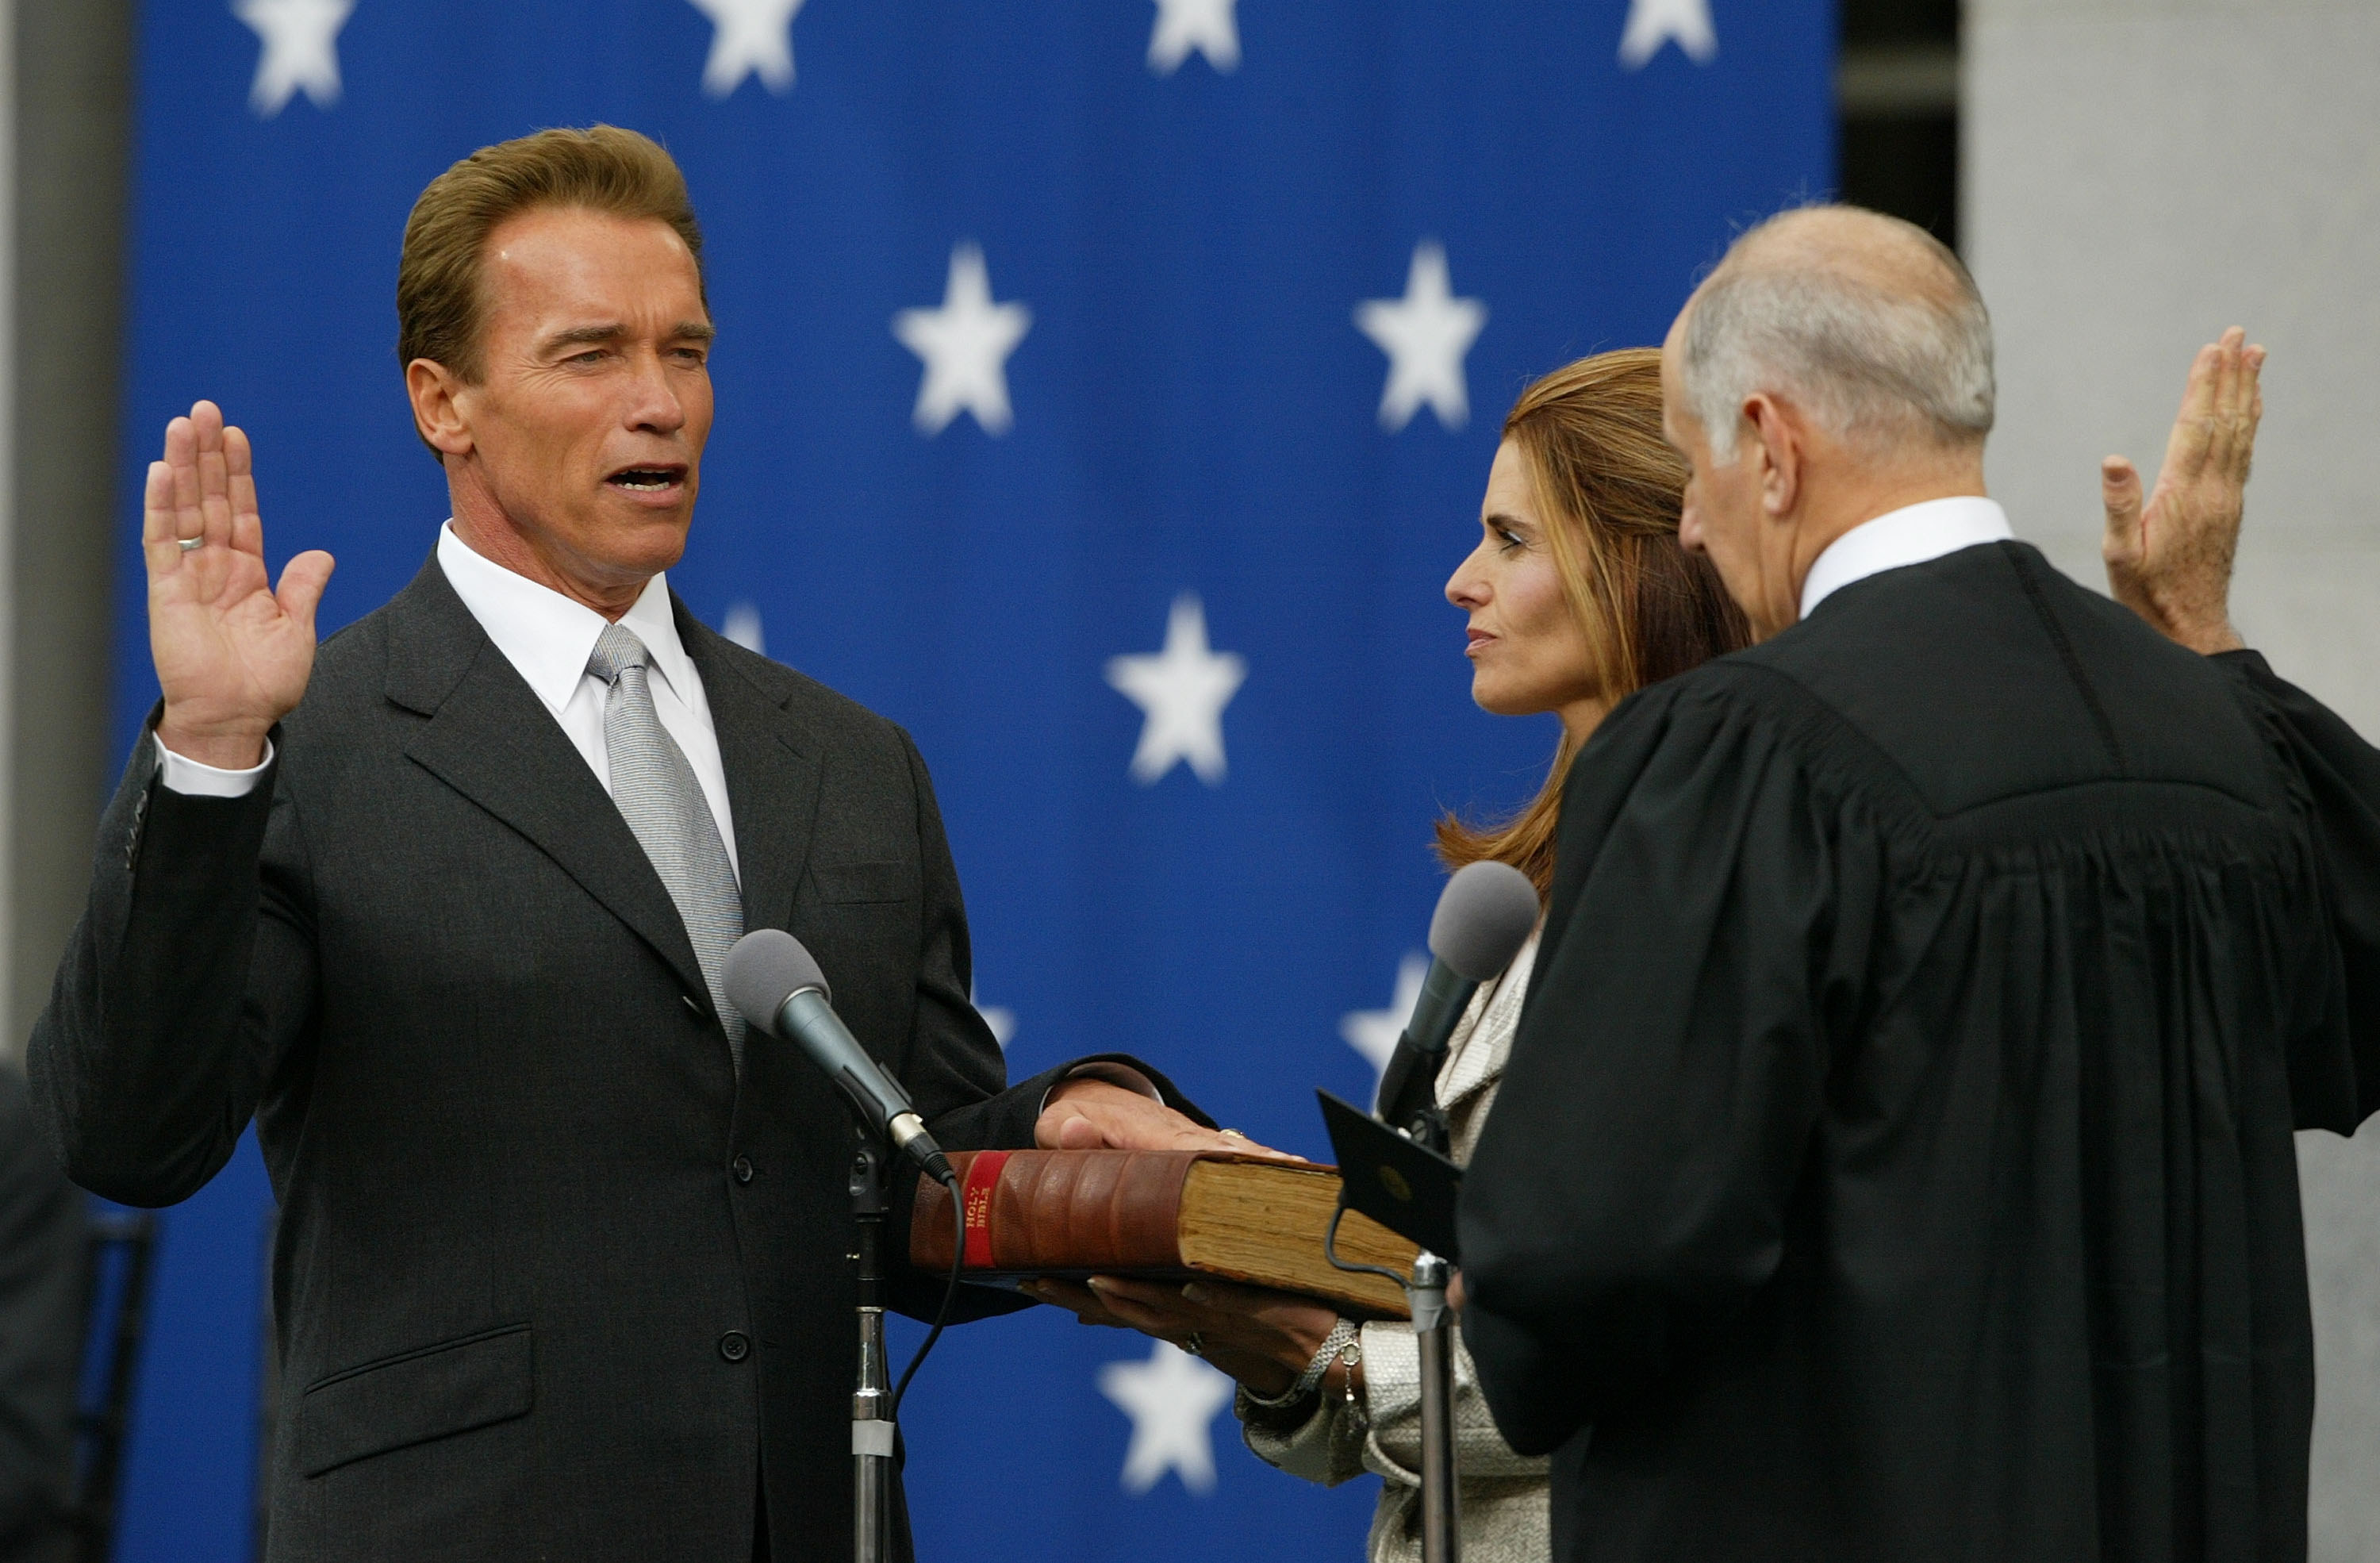 Arnold Schwarzenegger is sworn in as the 38th governor of California